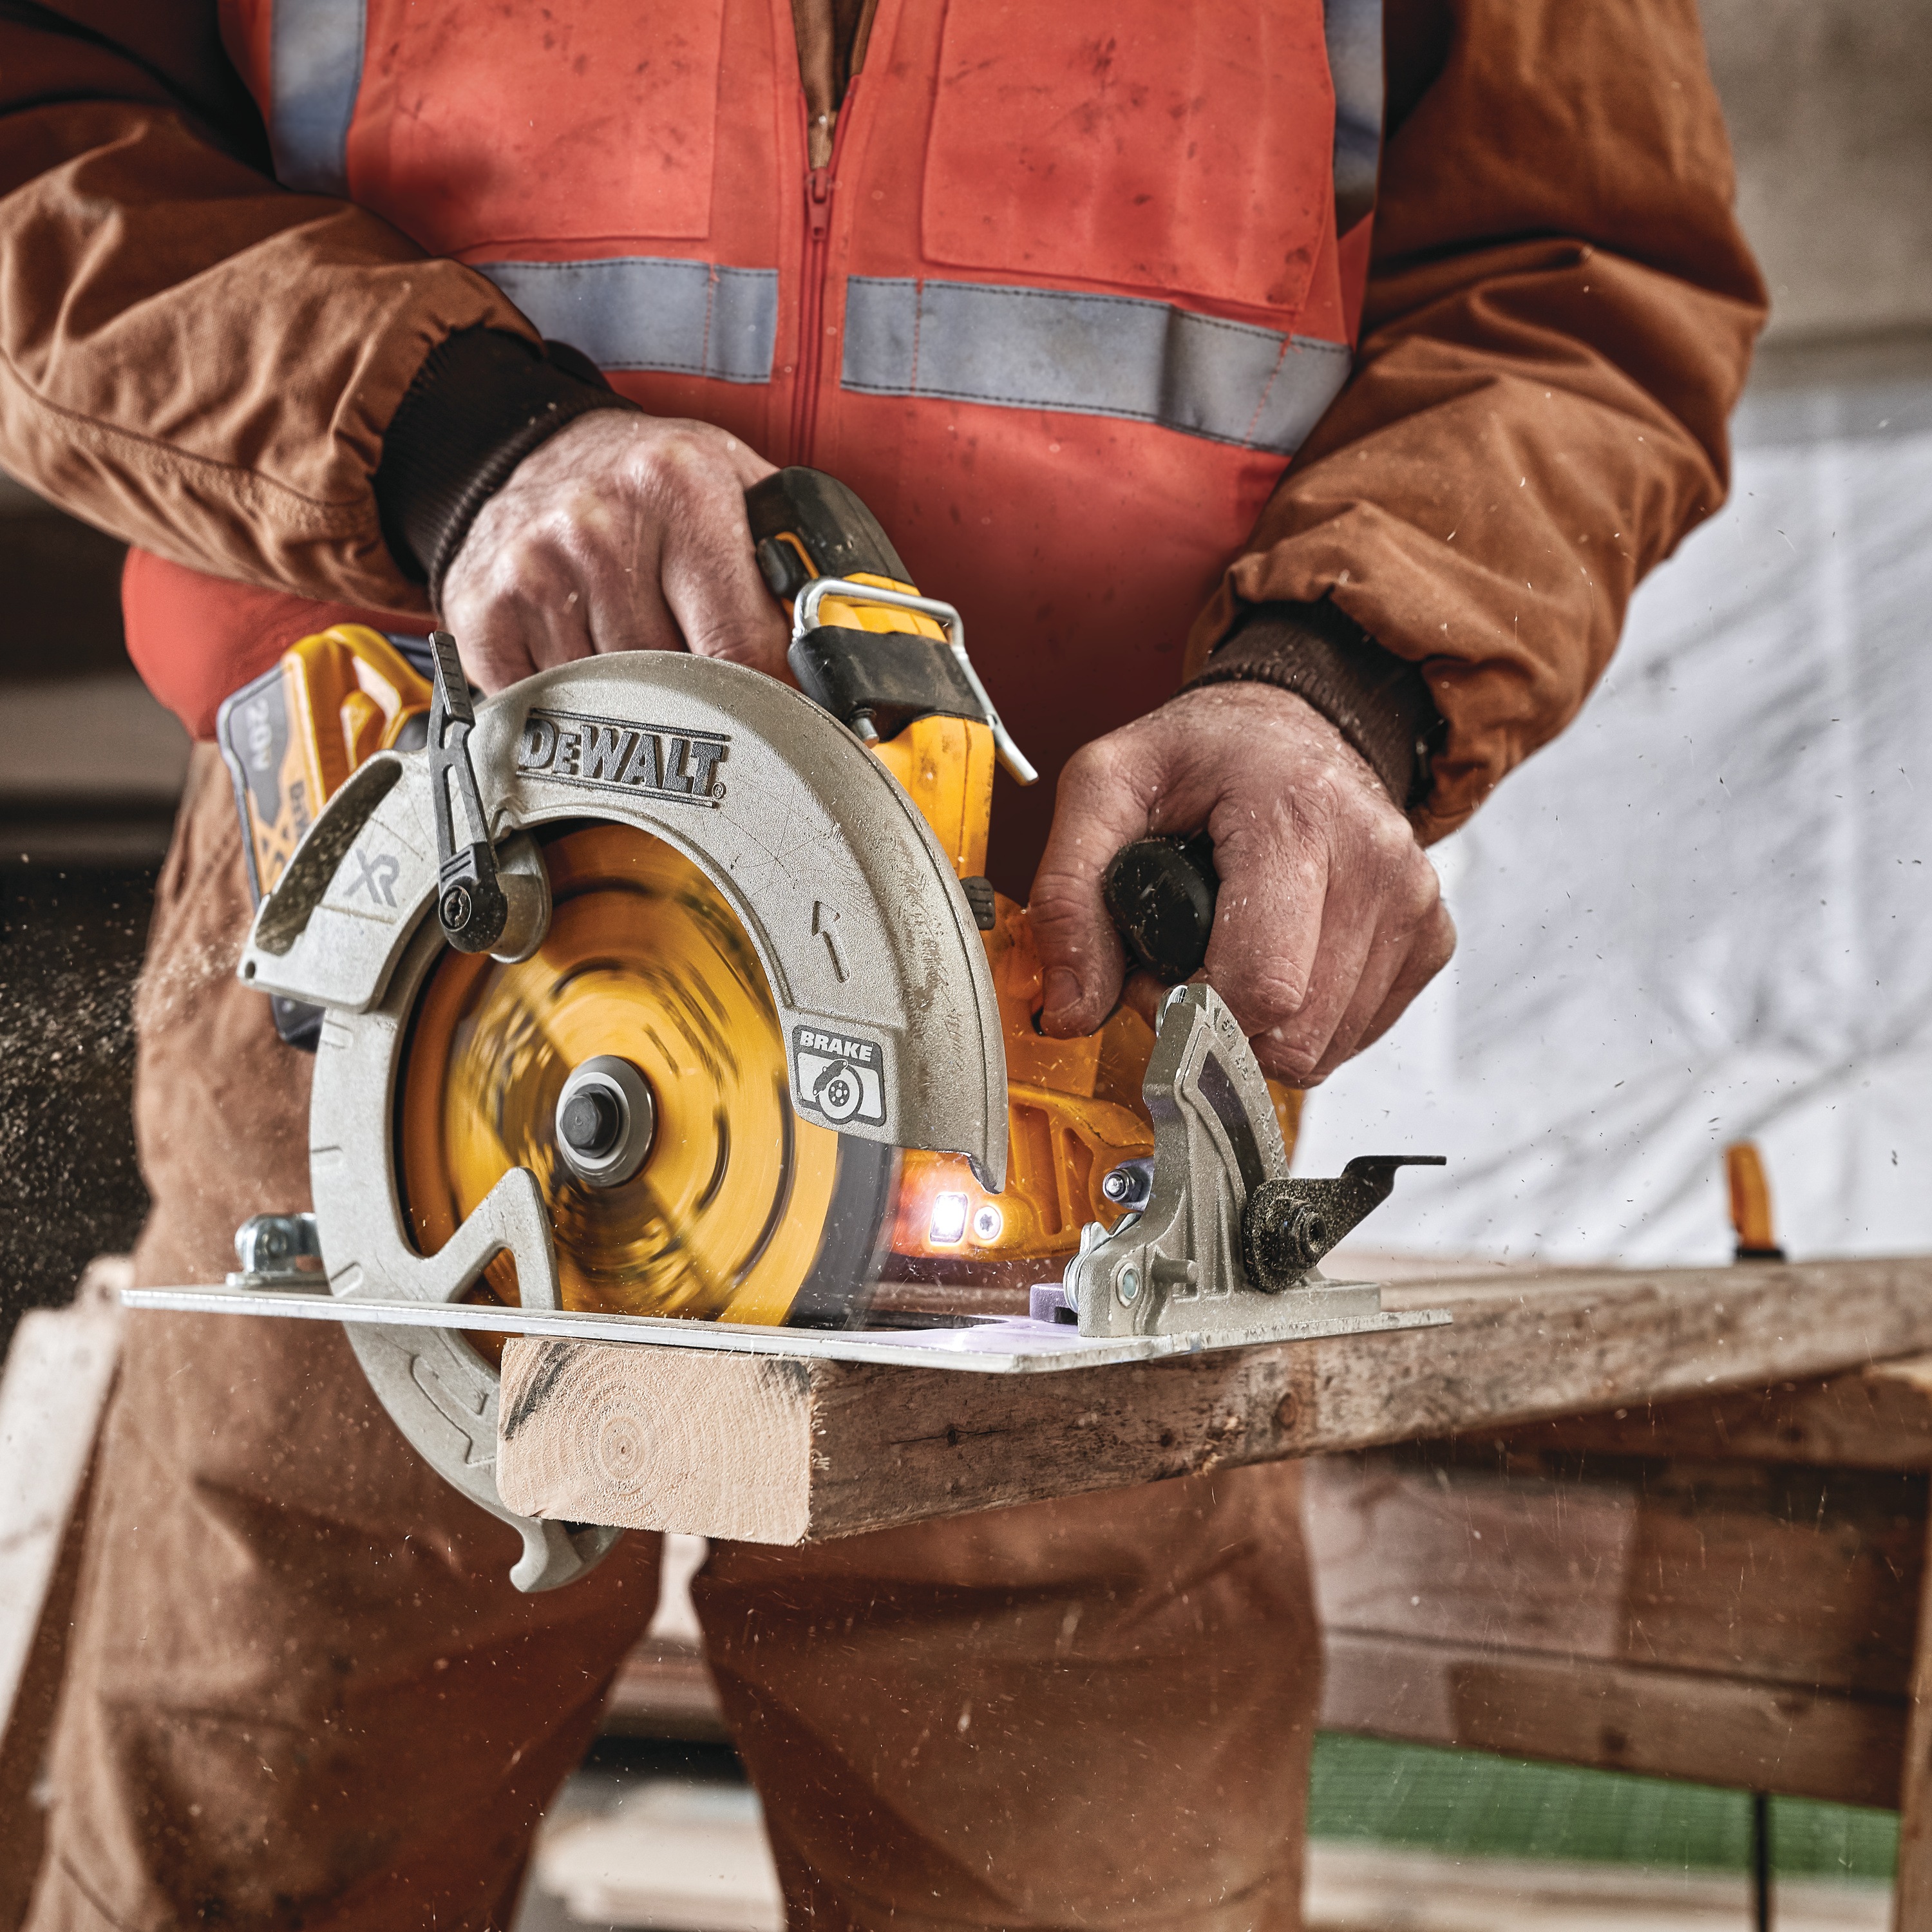 XR brushless circular saw with POWER DETECT tool technology cutting wooden plank.